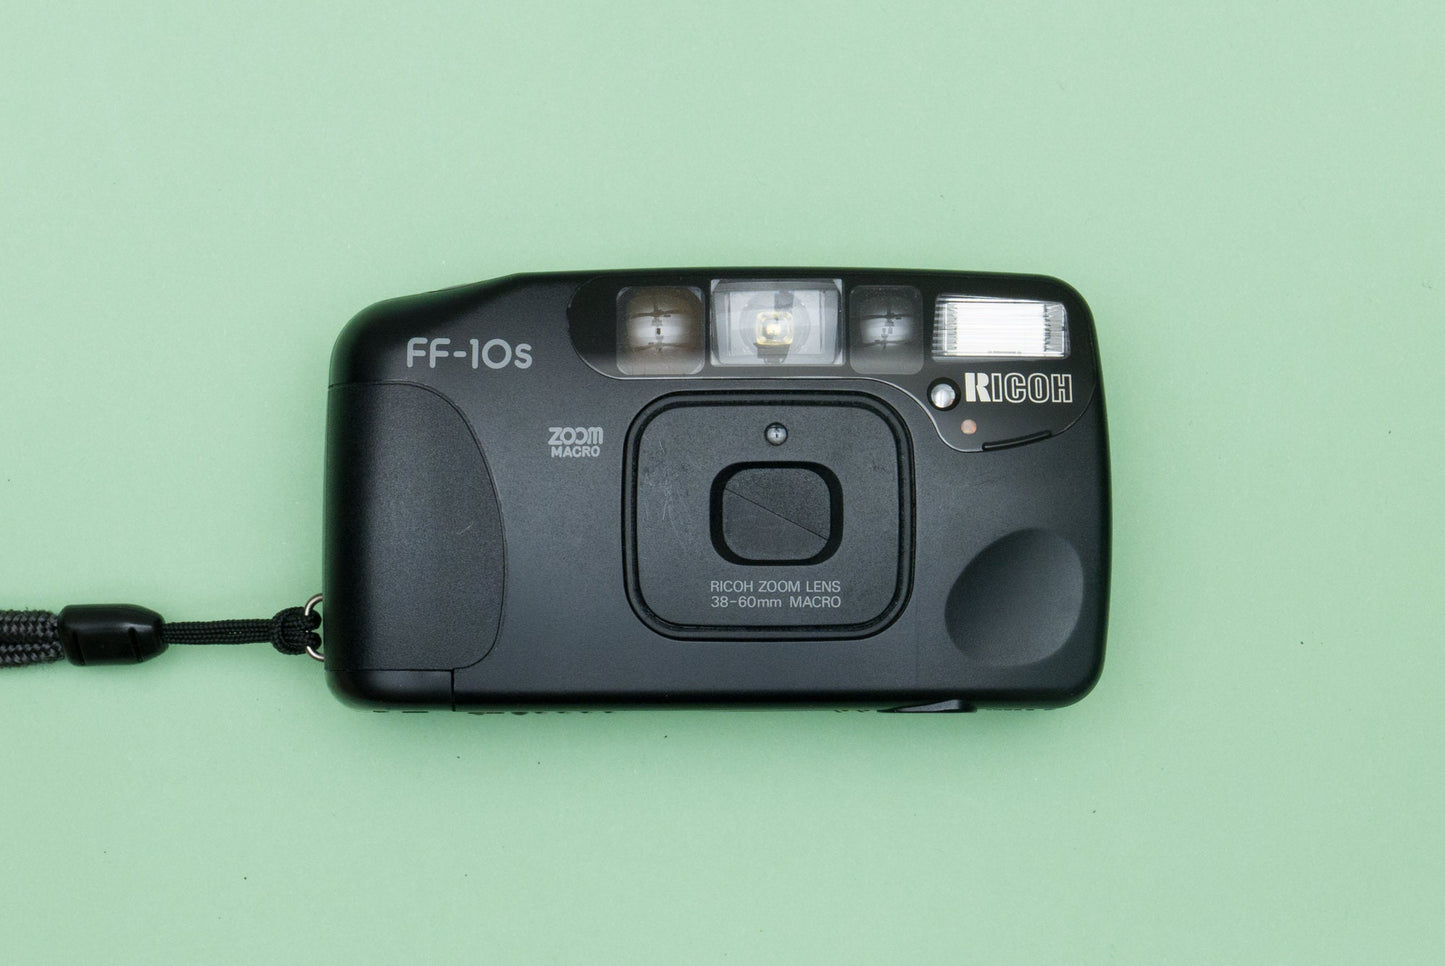 Ricoh FF-10s Zoom Macro Date Compact 35mm Point and Shoot Film Camera